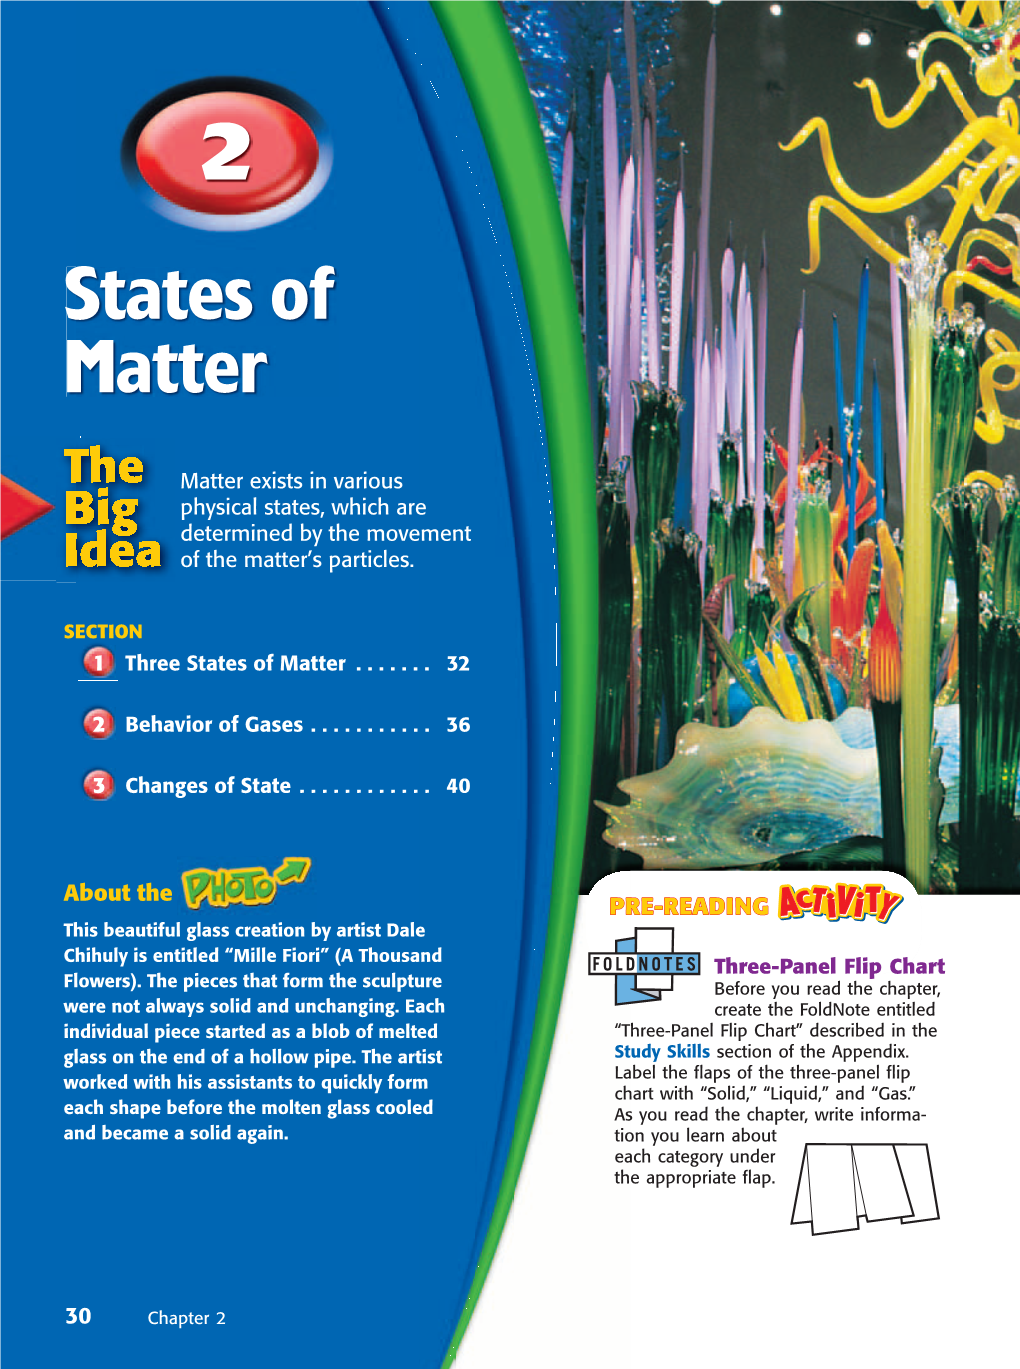 States of Matter Chapter (Sections 1-3)